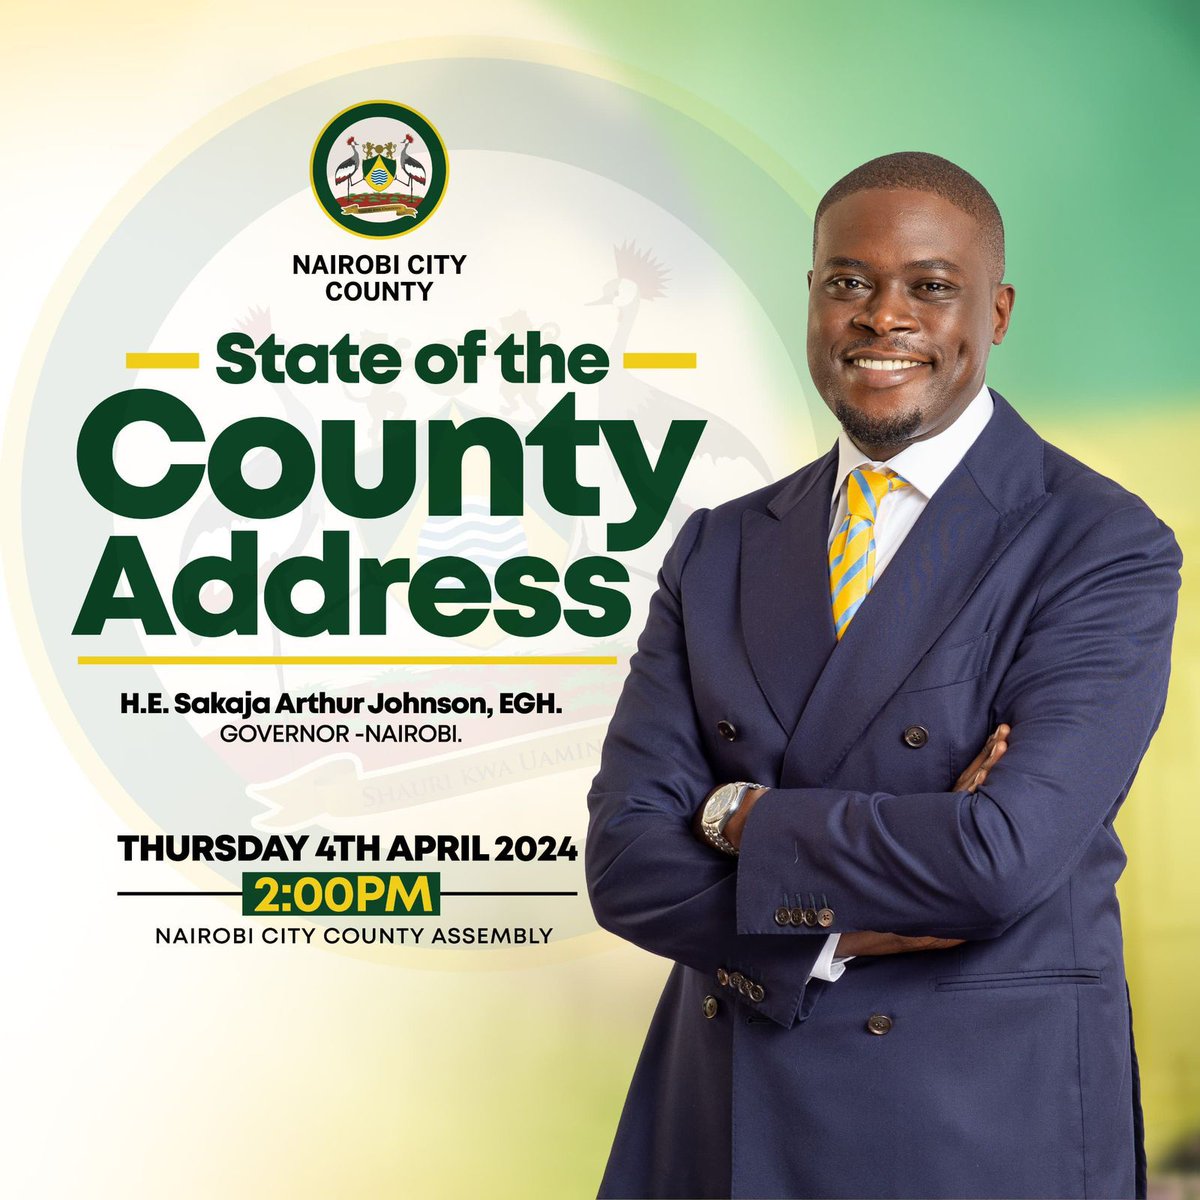 In line with Section 30 (2) (k) of the County Governments Act, 2012, H.E. Hon. Sakaja Arthur Johnson, EGH, Governor of Nairobi, will be delivering the State of the County Address on Thursday at 2pm at the County Assembly Chambers.